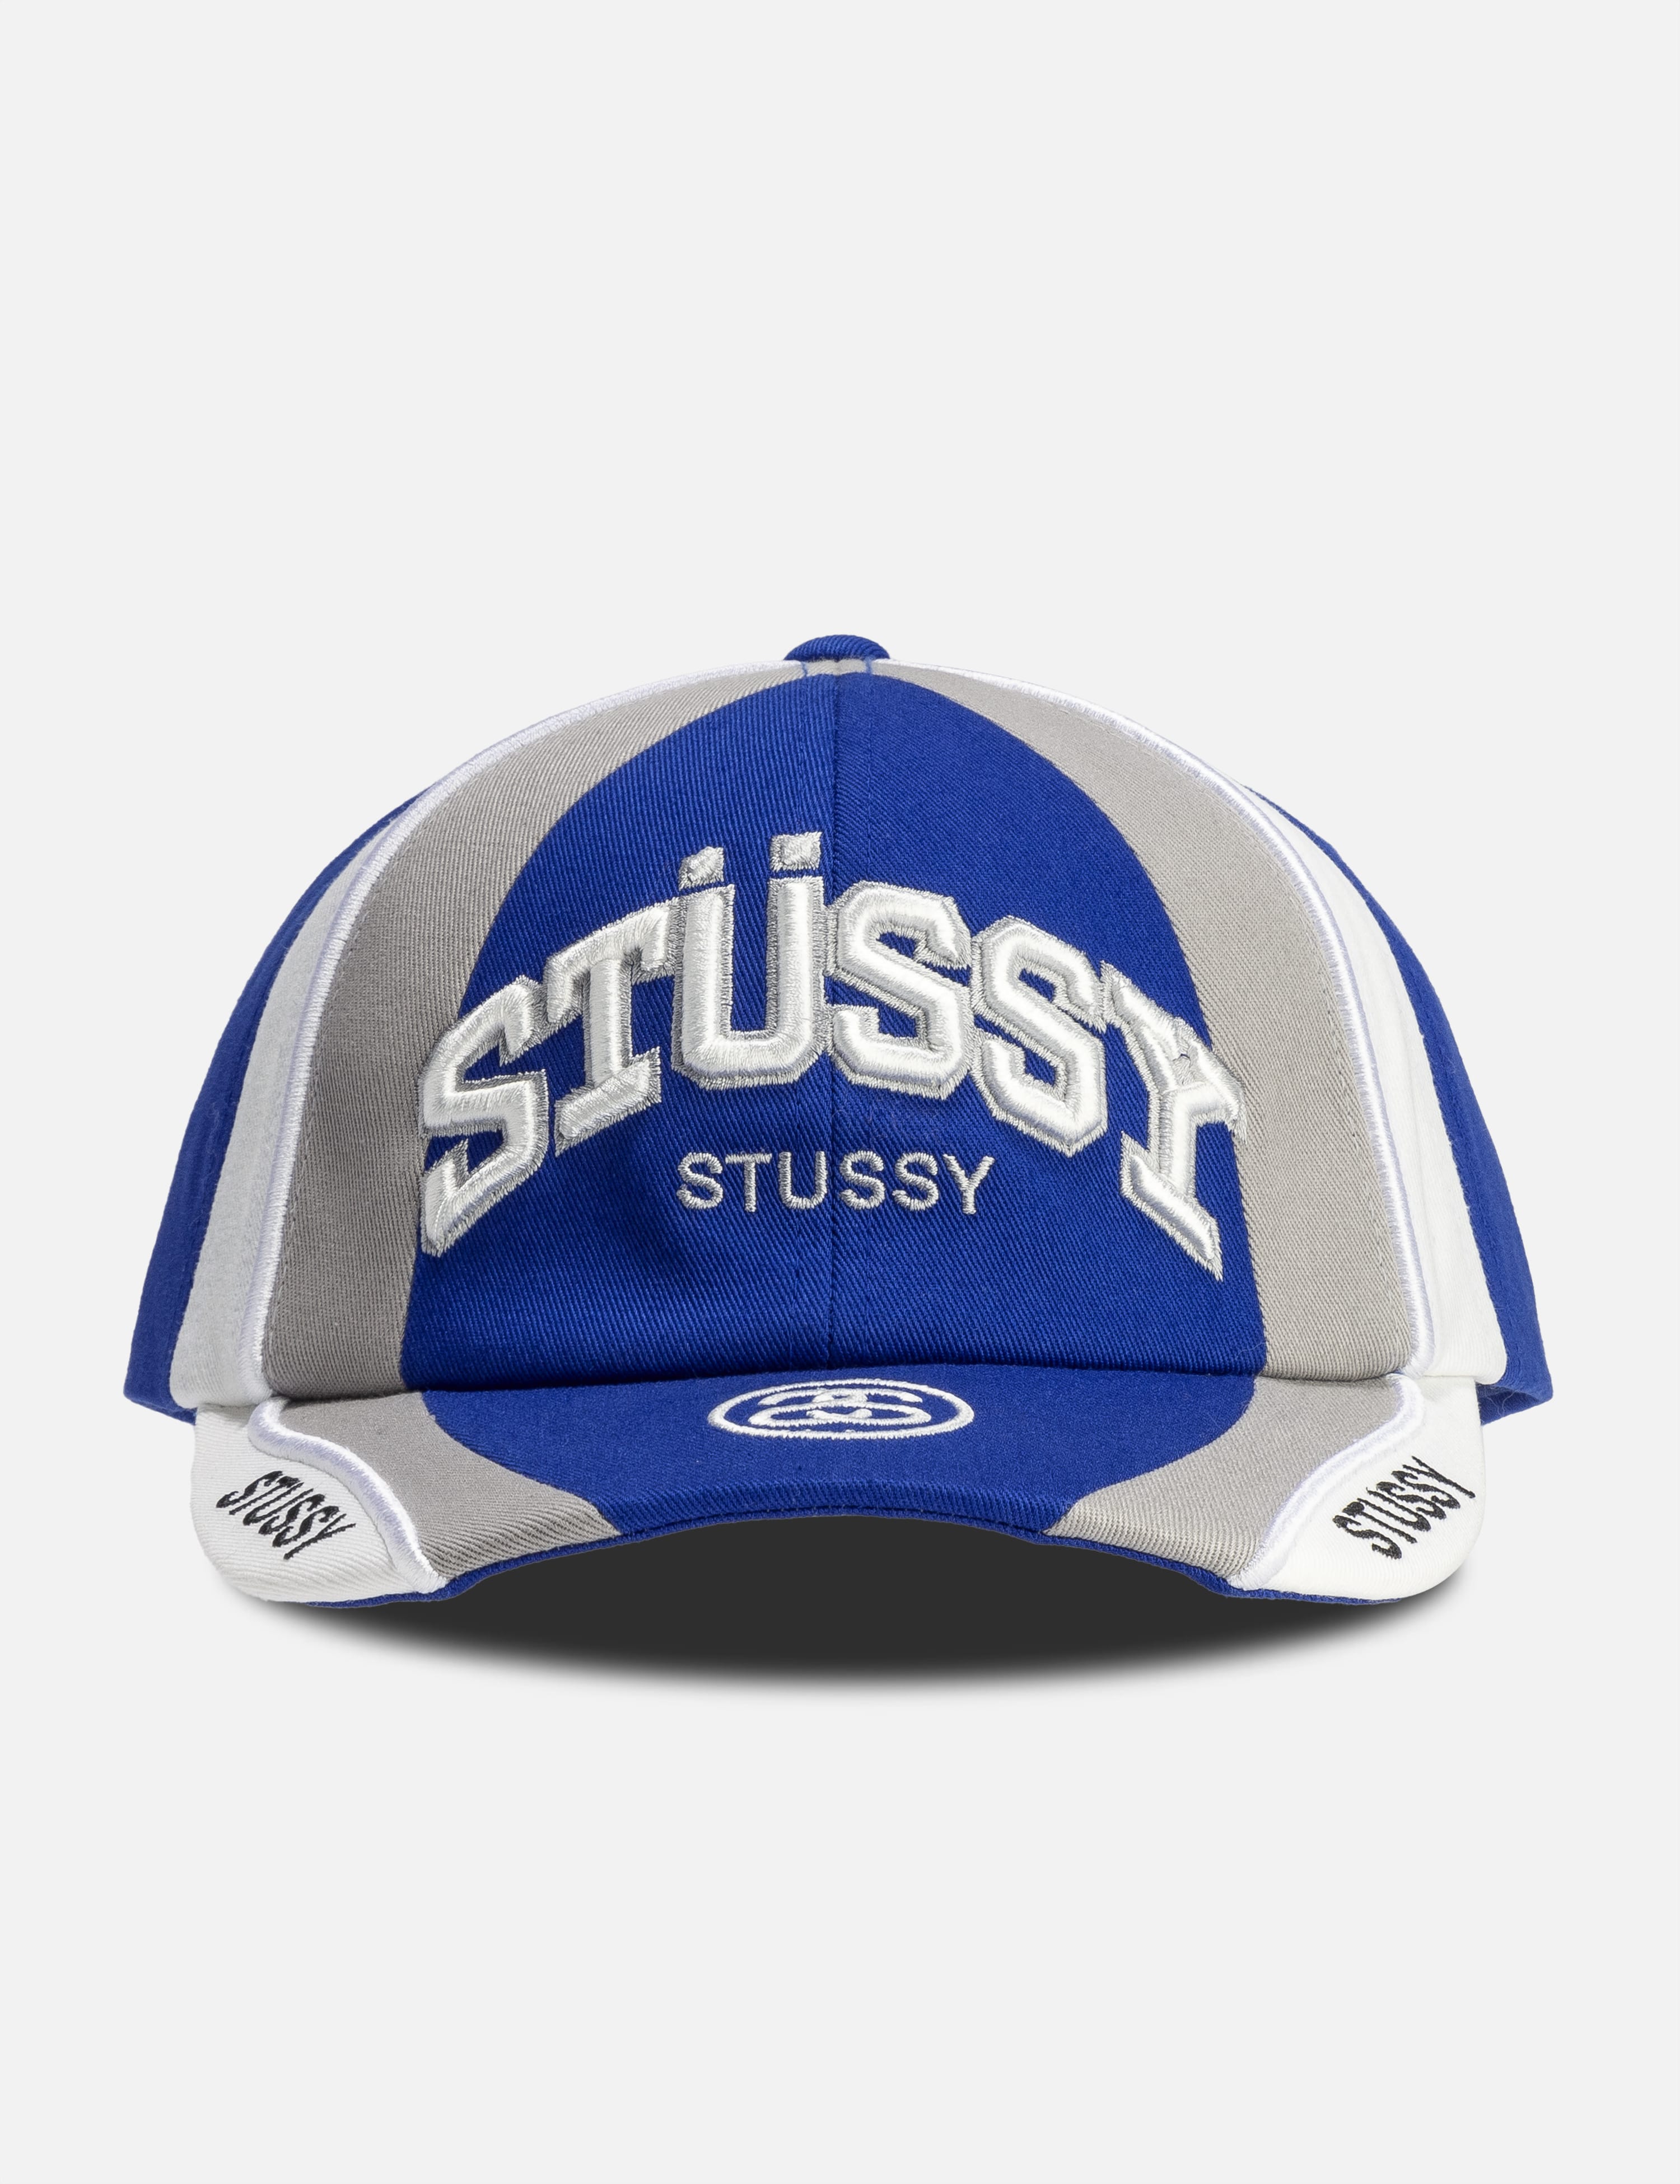 Stüssy - Souvenir Low Pro Cap | HBX - Globally Curated Fashion and